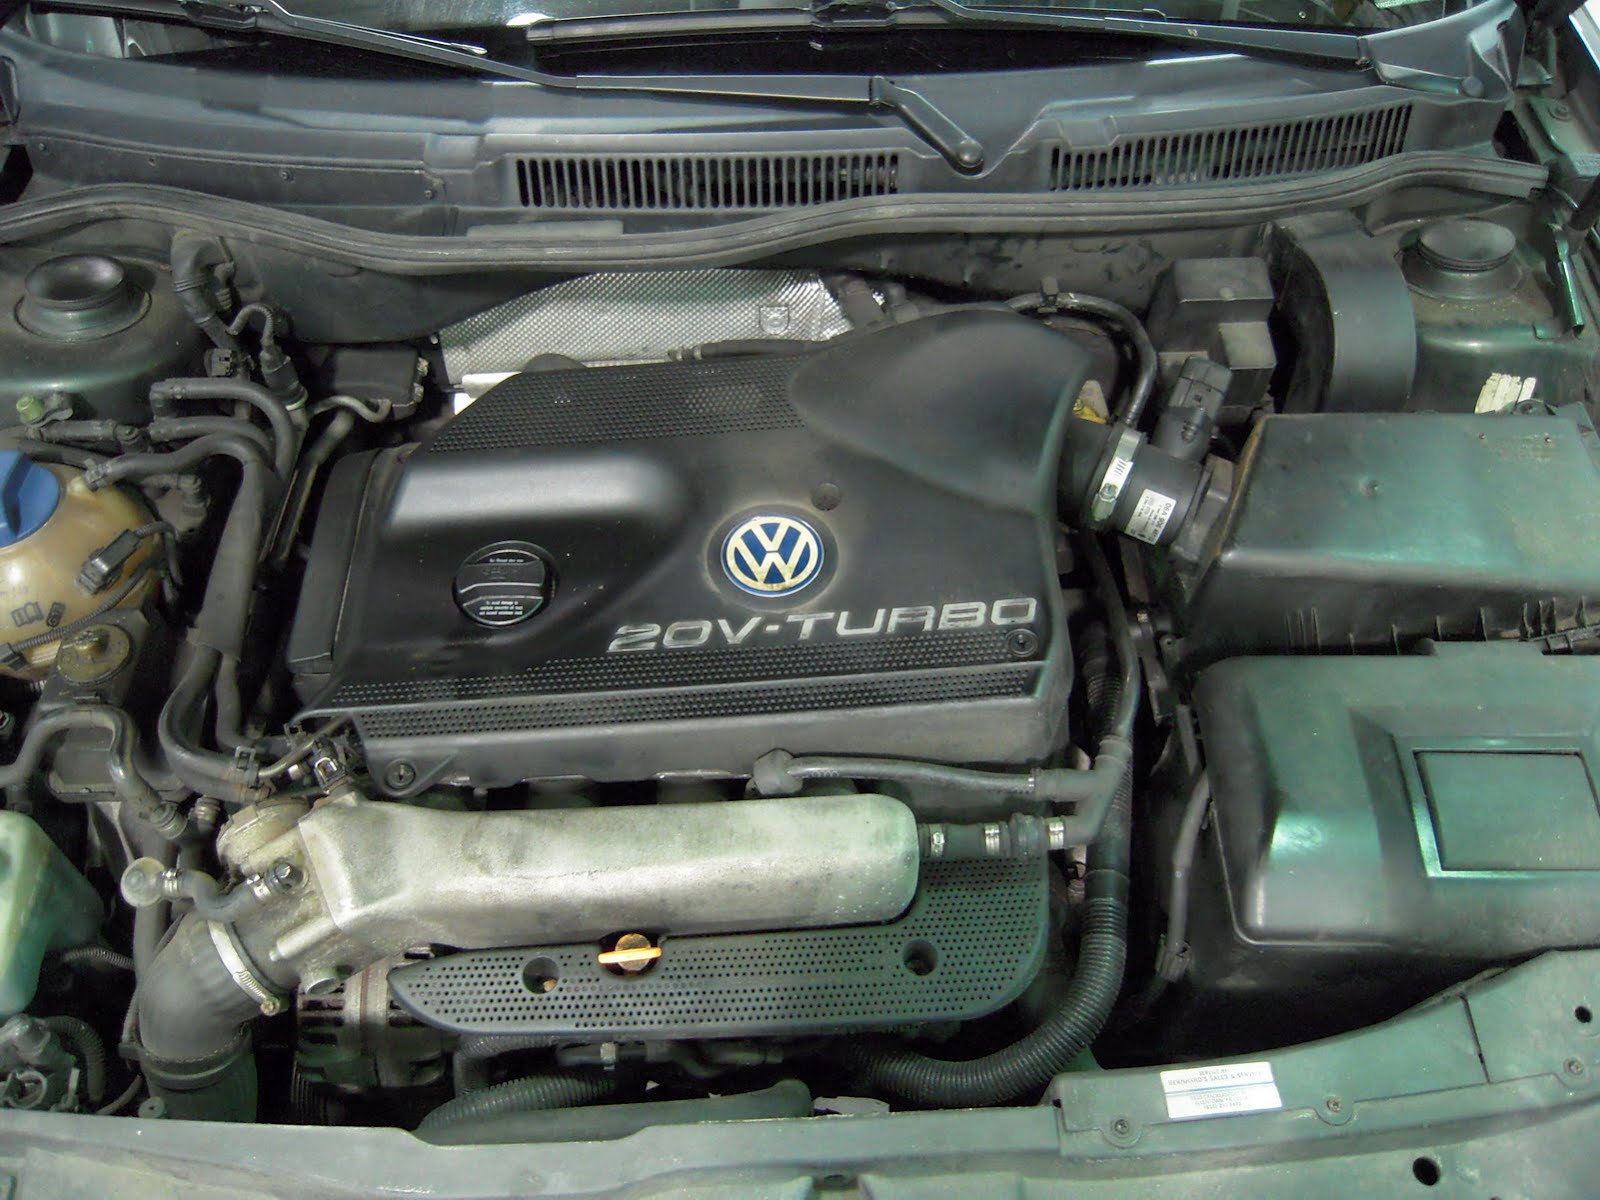 2001 Vw Jetta 1 8t Receives An Autopsy After Hitting The